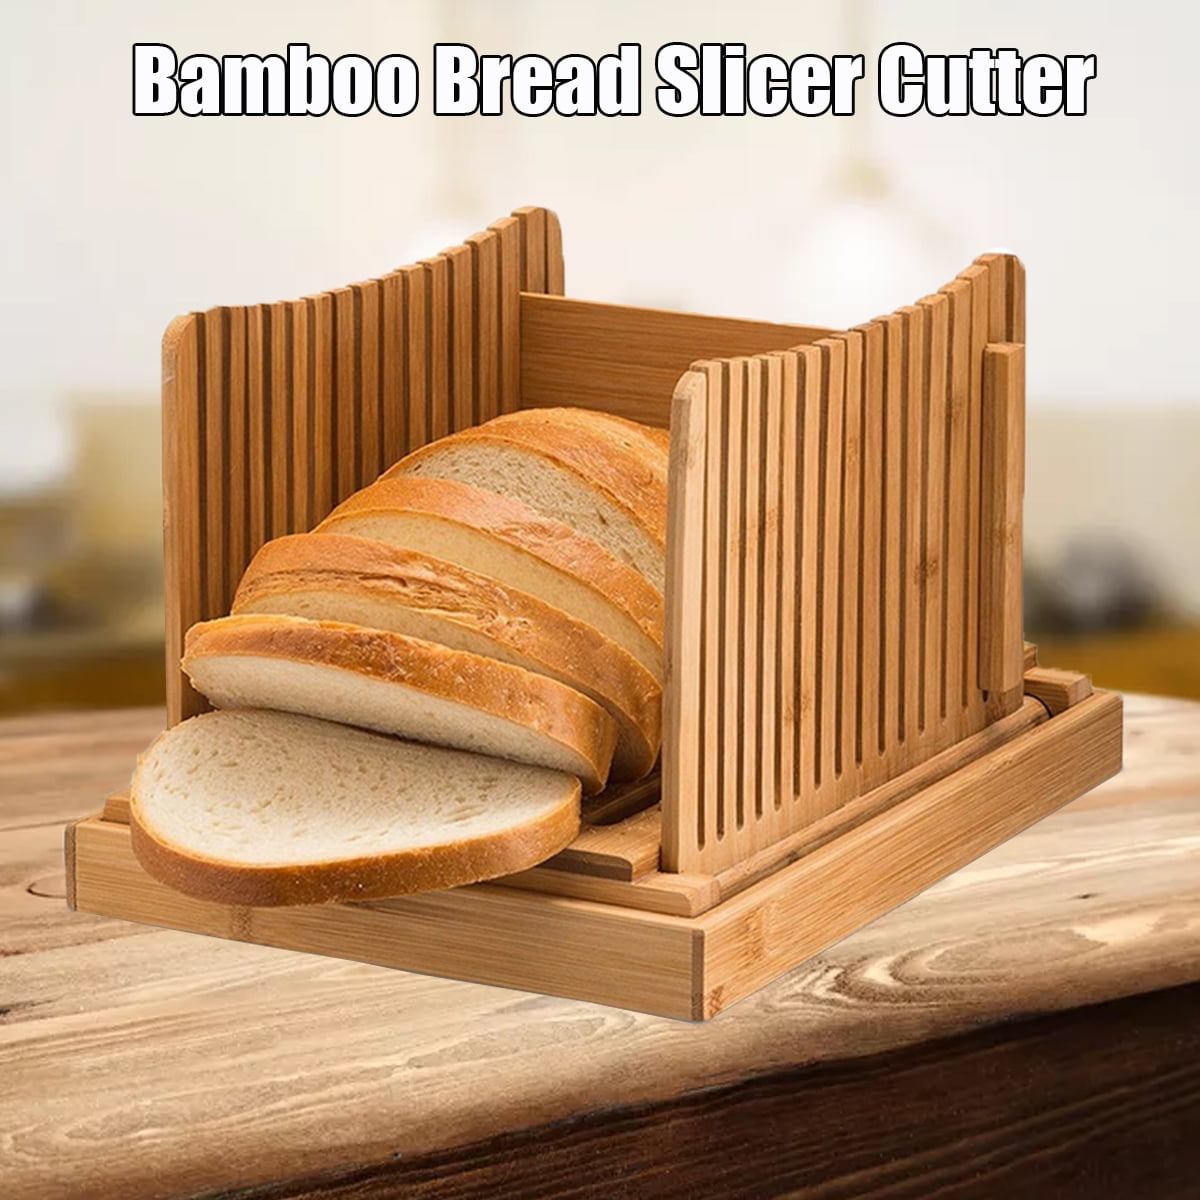 Purenjoy Bamboo Wood Foldable Bread Slicer Compact Bread Slicing Guide with Crumb Catcher Tray for Homemade Bread Thickness Adjustable